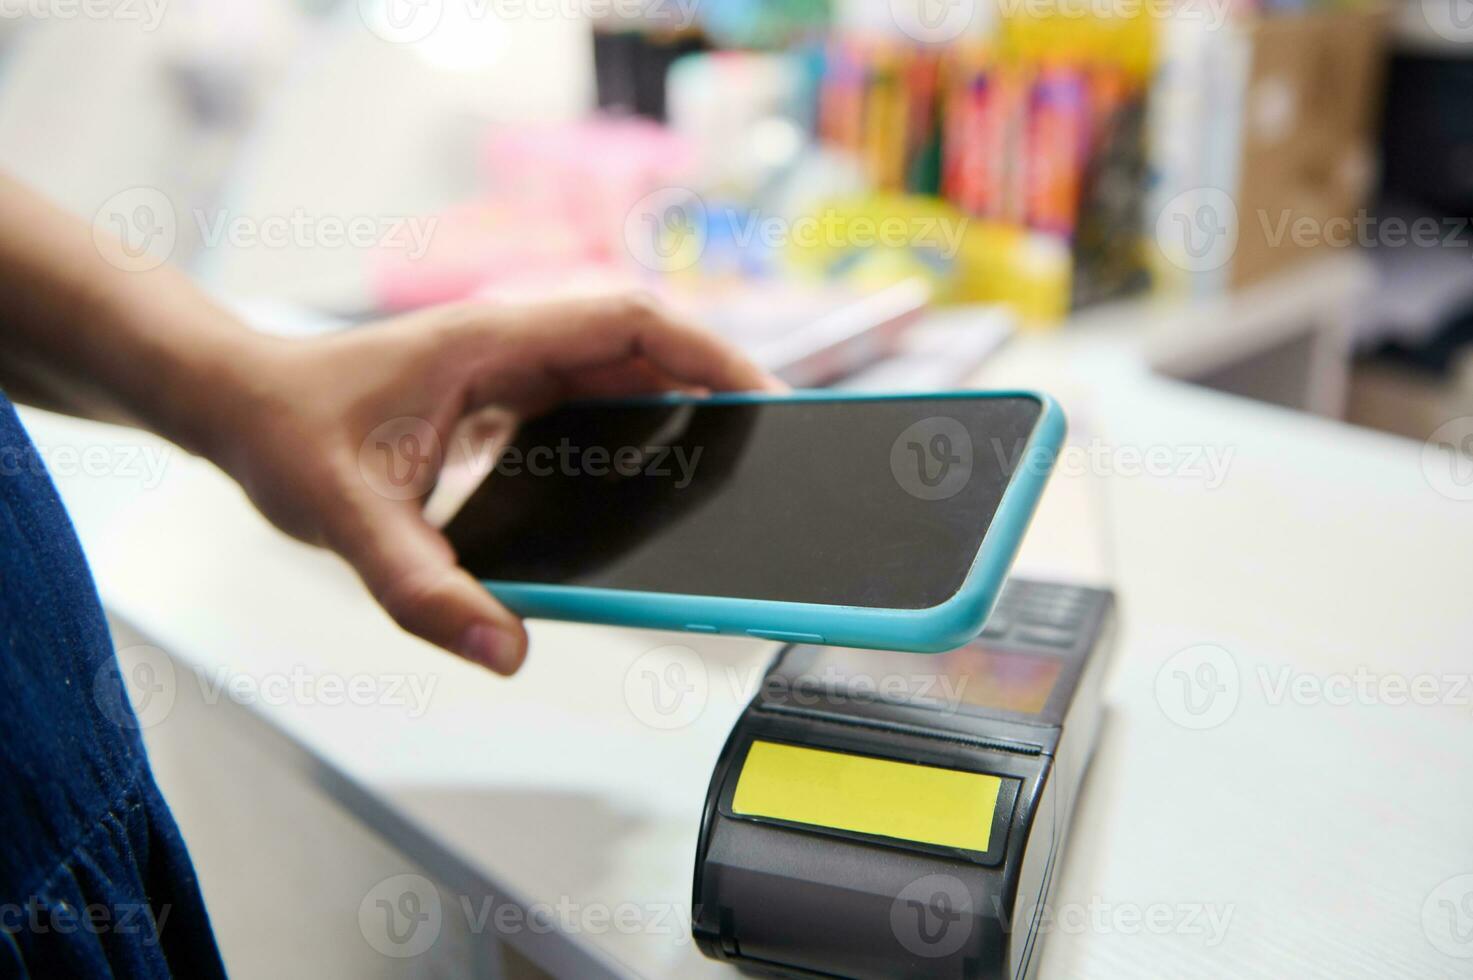 Close-up mobile phone in customer's hand paying via NFC technology, holding smart mobile phone above a POS terminal. photo